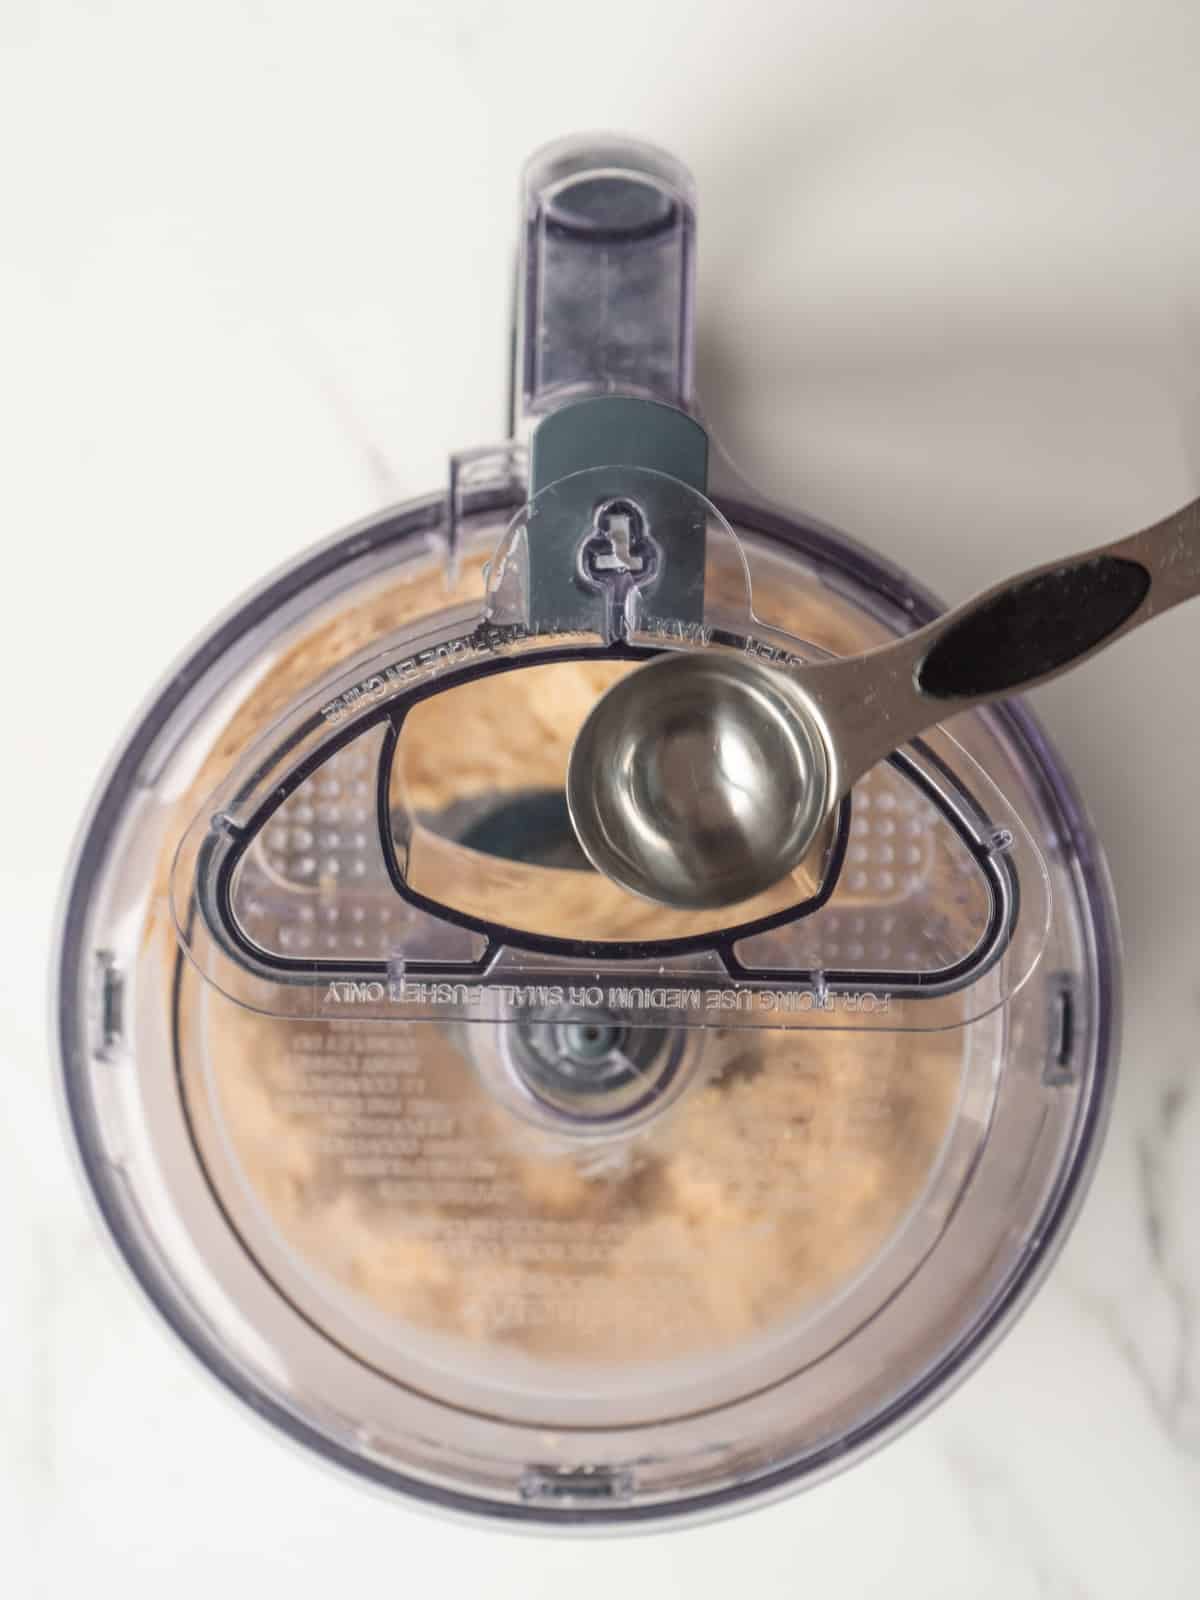 A food processor being run to make hummus, and a spoon being used to drizzle cold water from the top opening in the lid, with the food processor running.